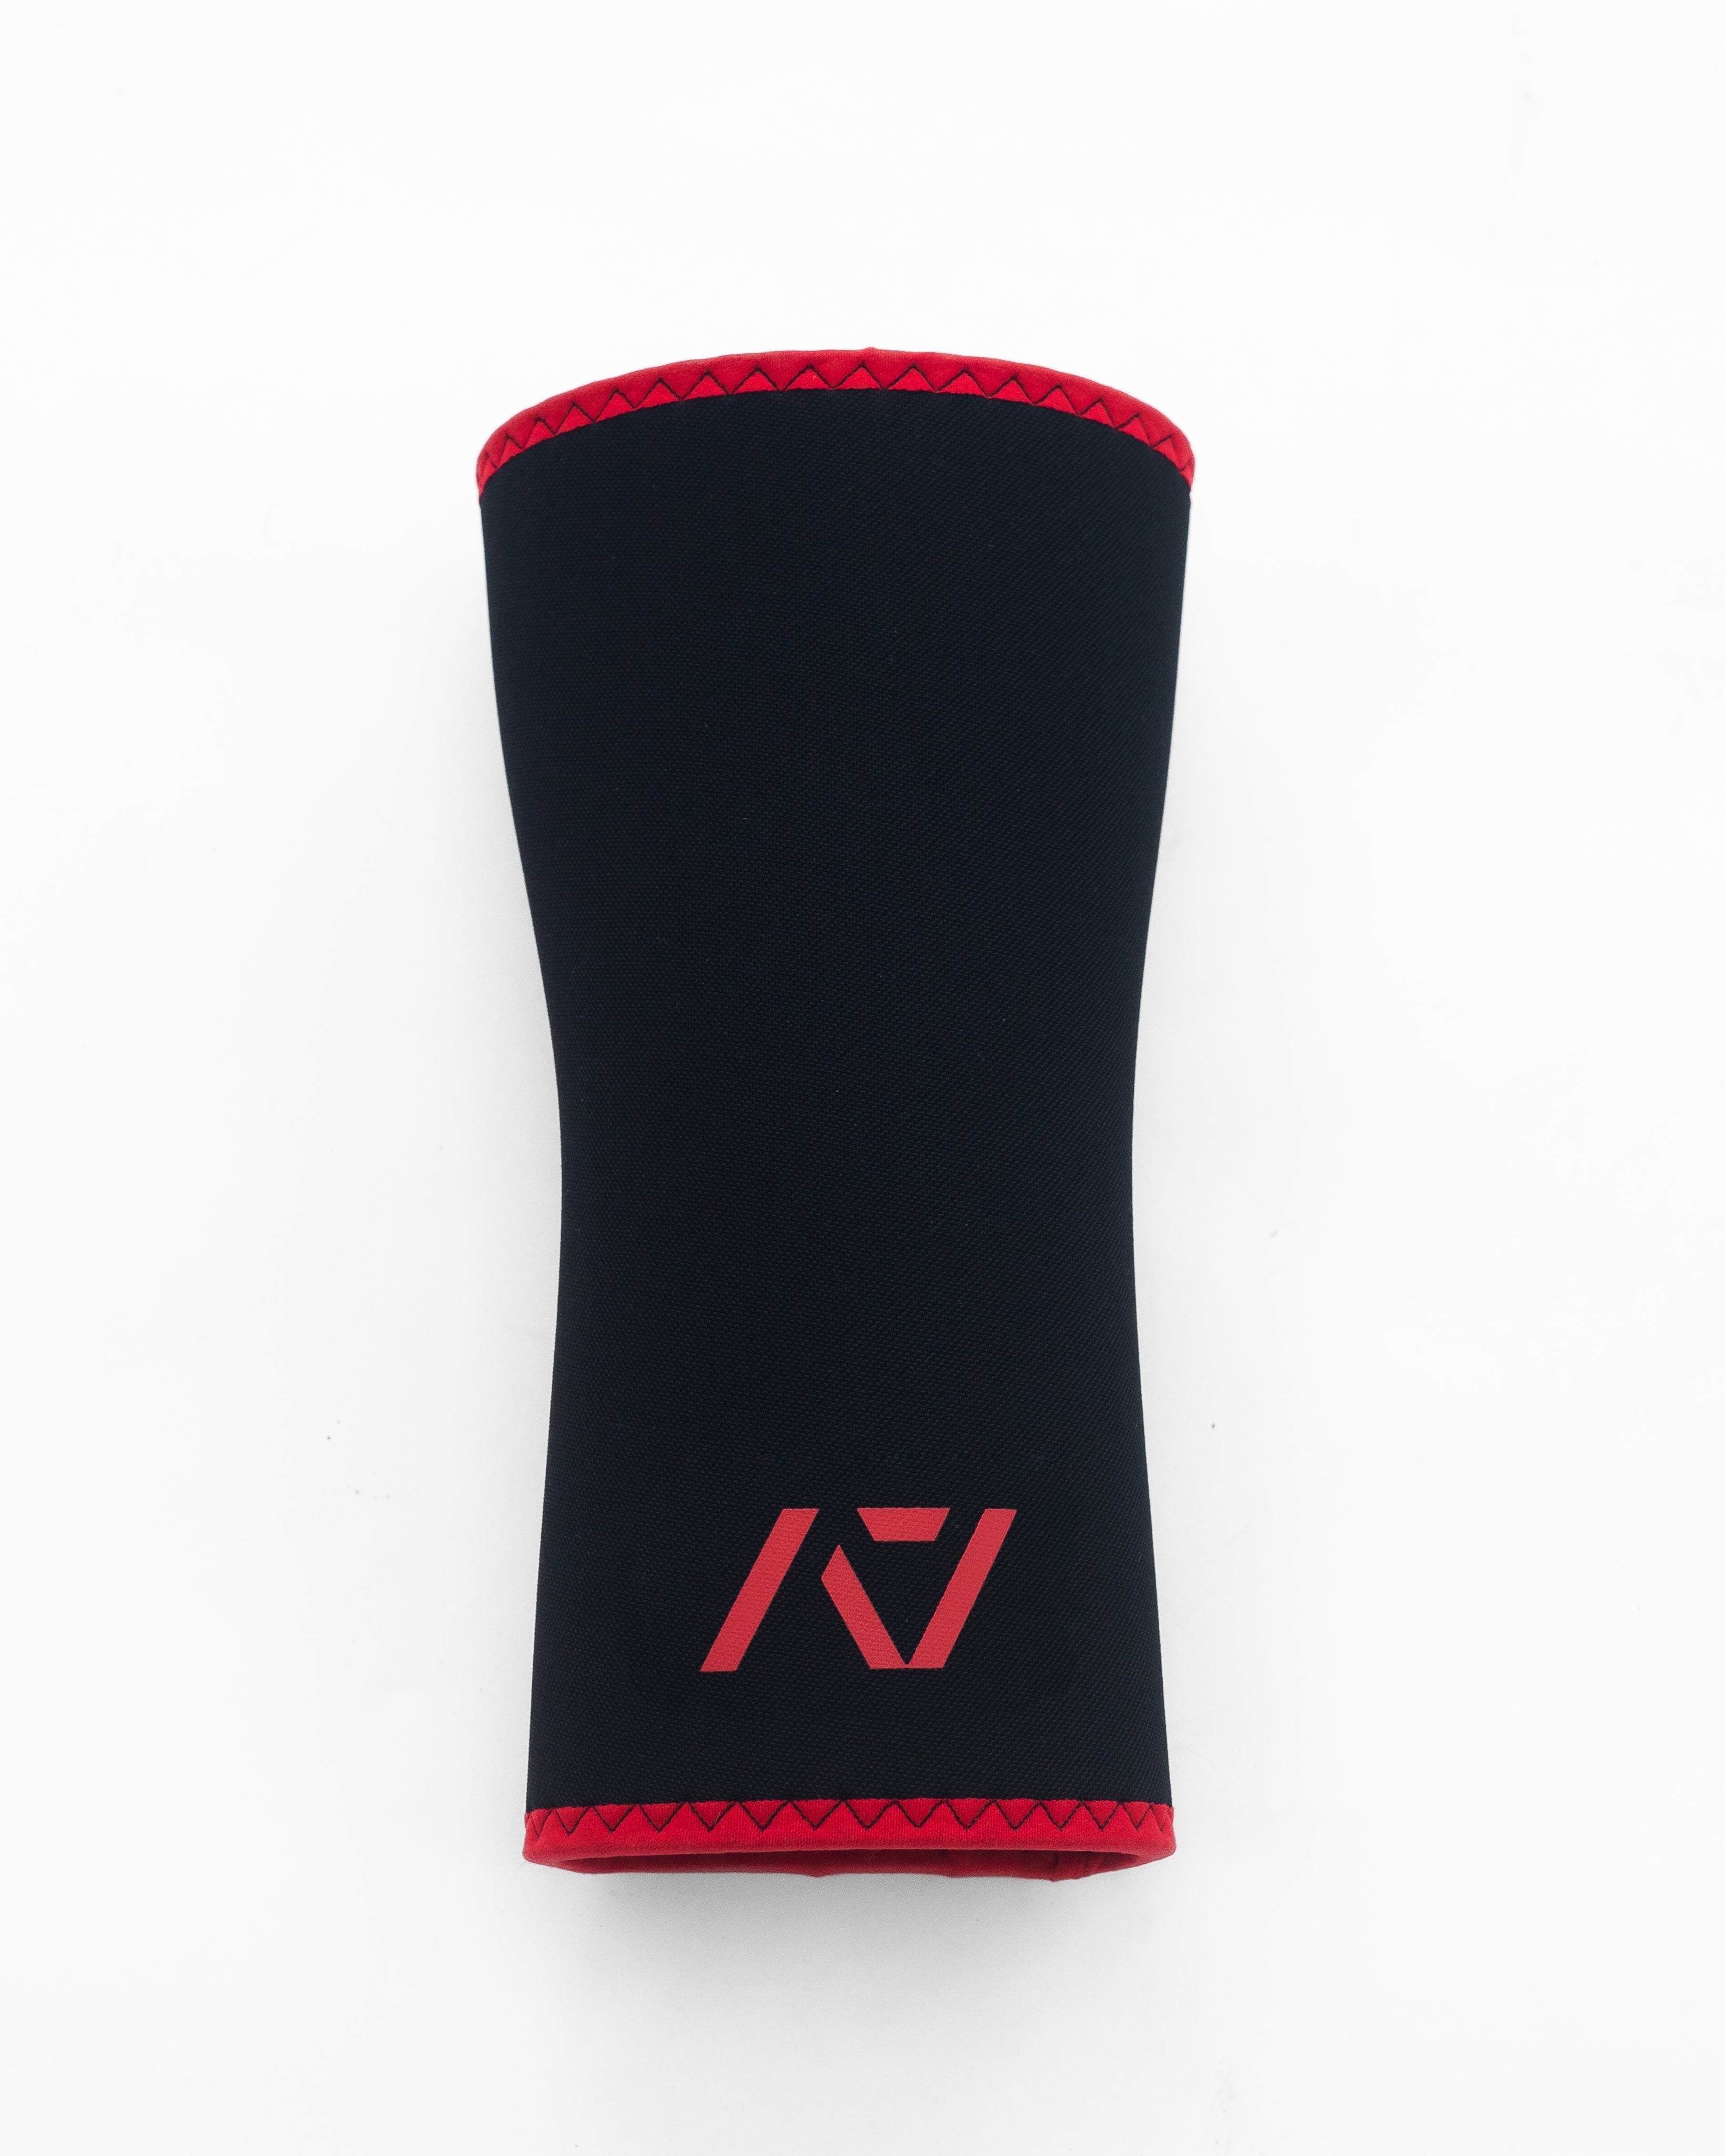 Hourglass Knee Sleeves - Red Dawn| A7 Europe Shipping to EU